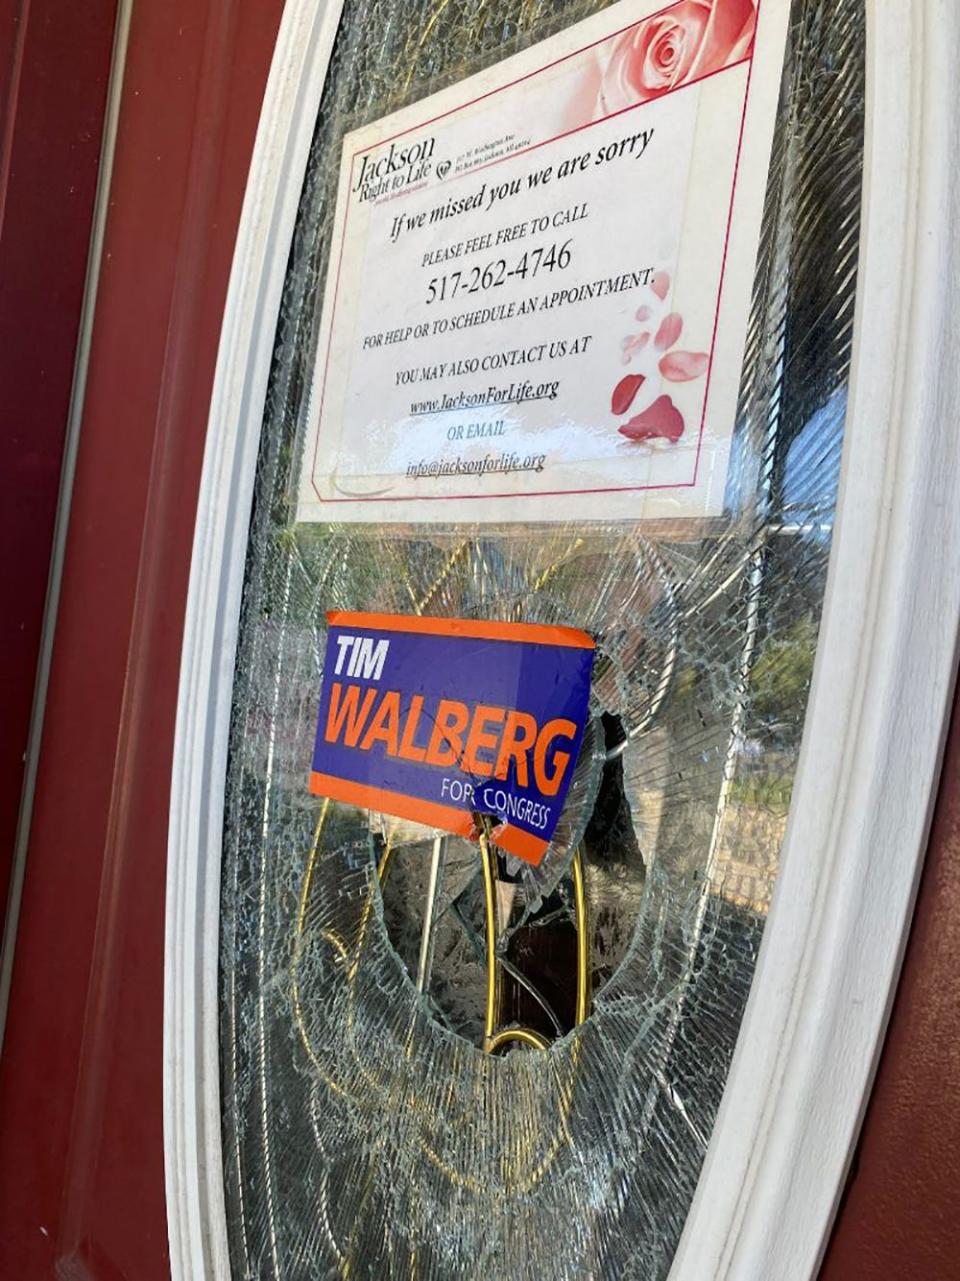 Congressman Tim Walberg’s campaign office in Jackson was vandalized Tuesday night.